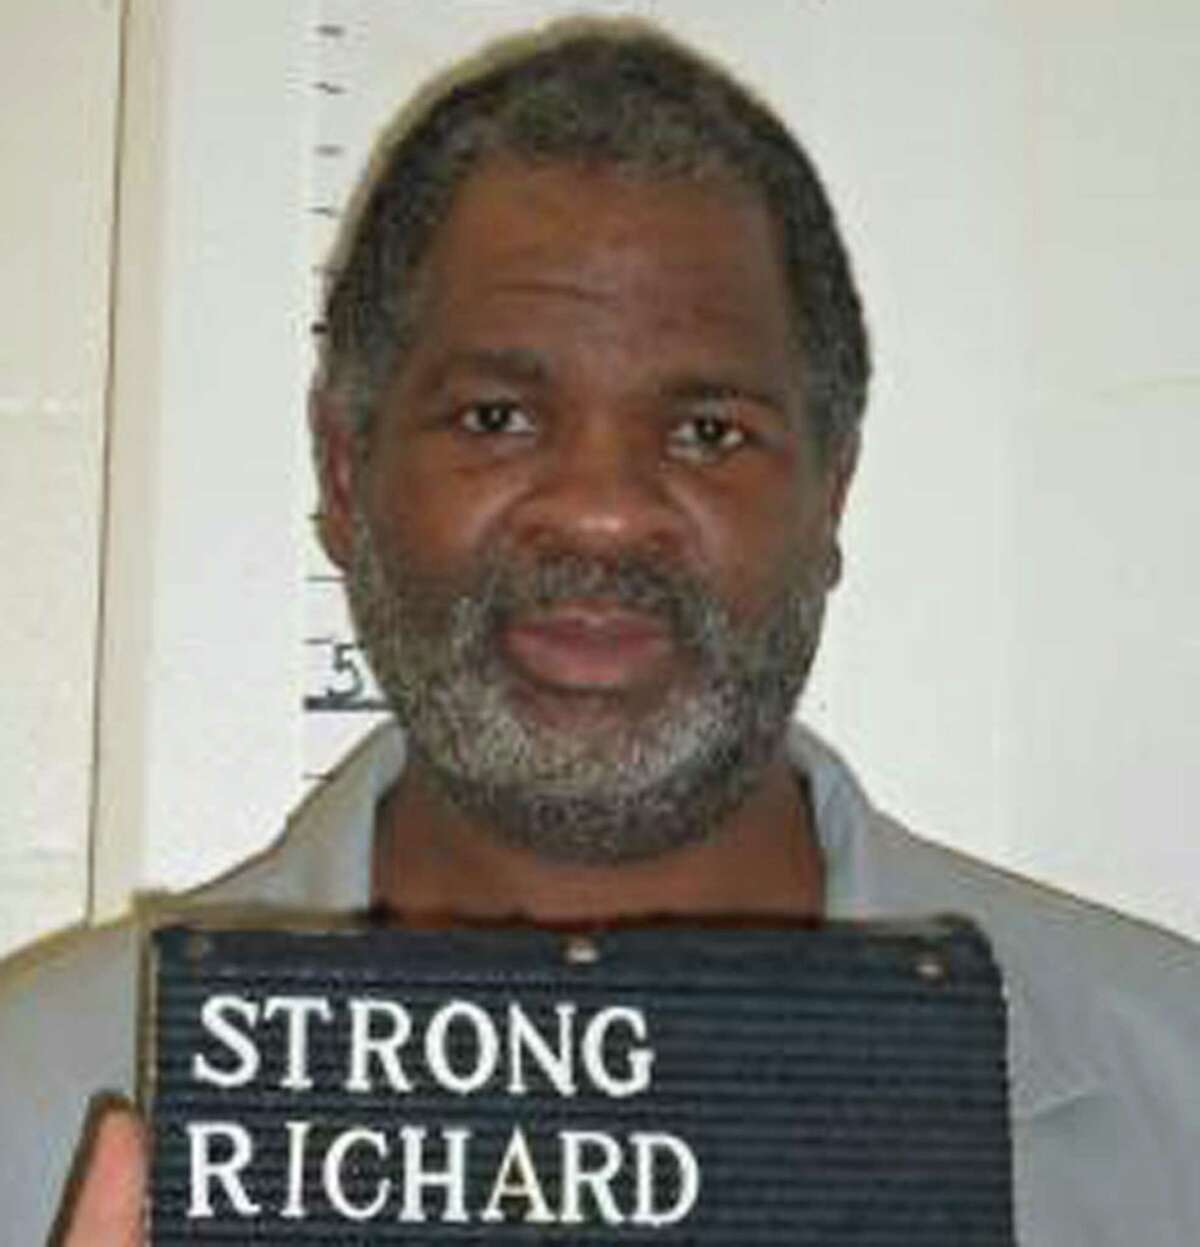 This Feb. 9, 2014 photo provided by the Missouri Department of Corrections shows Missouri death row inmate Richard Strong. Strong was convicted of fatally stabbing his girlfriend and her 2-year-old daughter 15 years ago in suburban St. Louis.